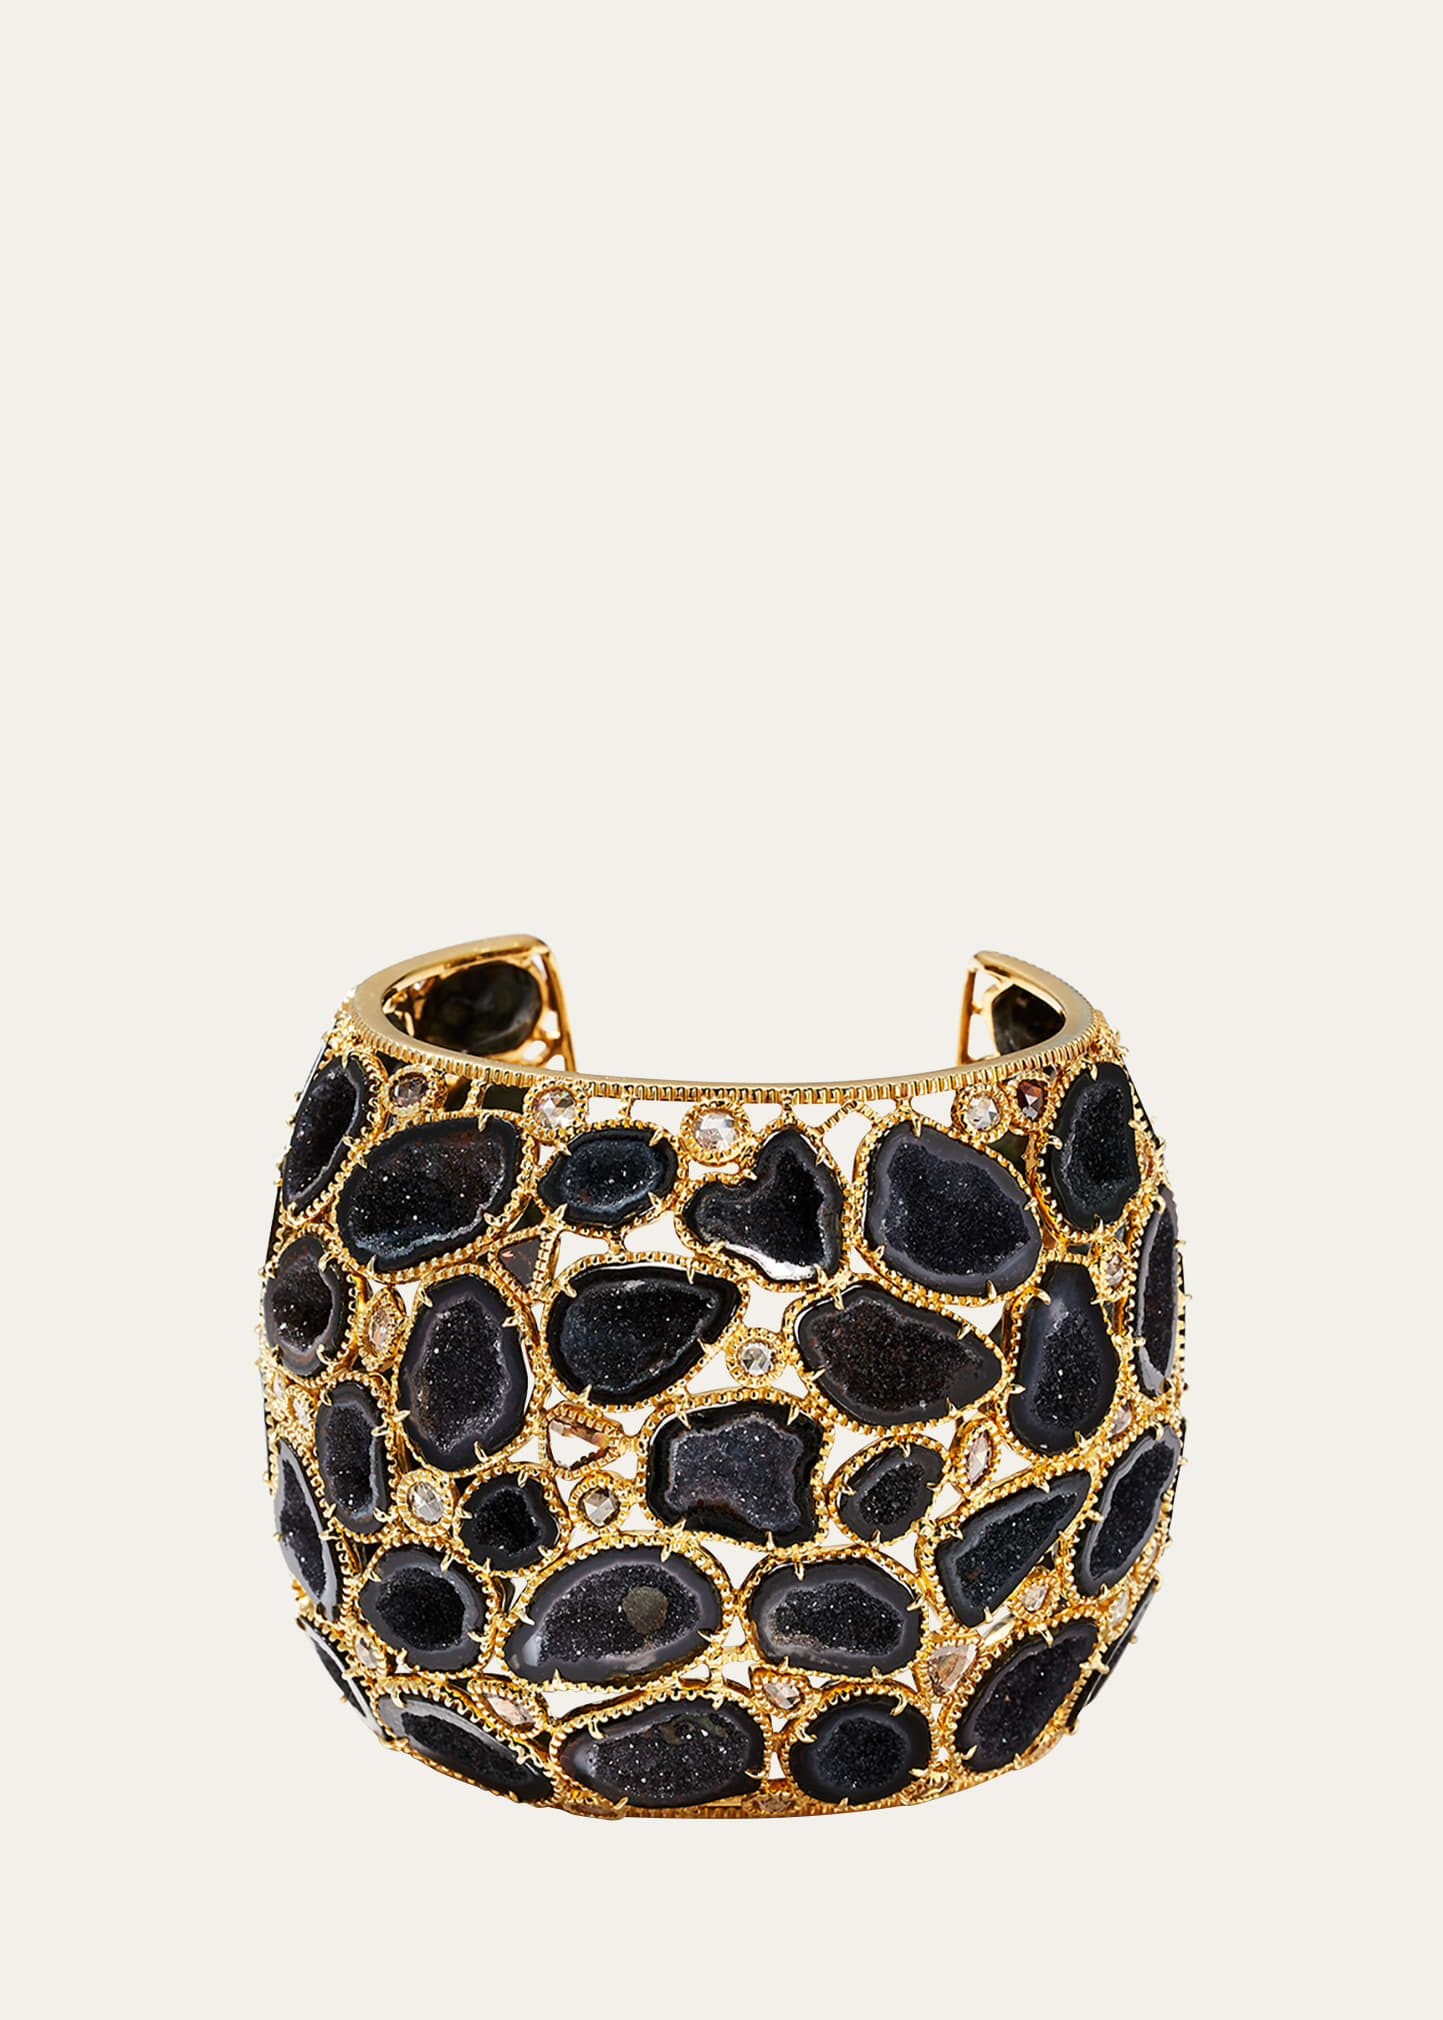 Kimberly McDonald One-of-a-Kind Dark Geode Cage Cuff with Natural Brown Diamonds in 18K Gold